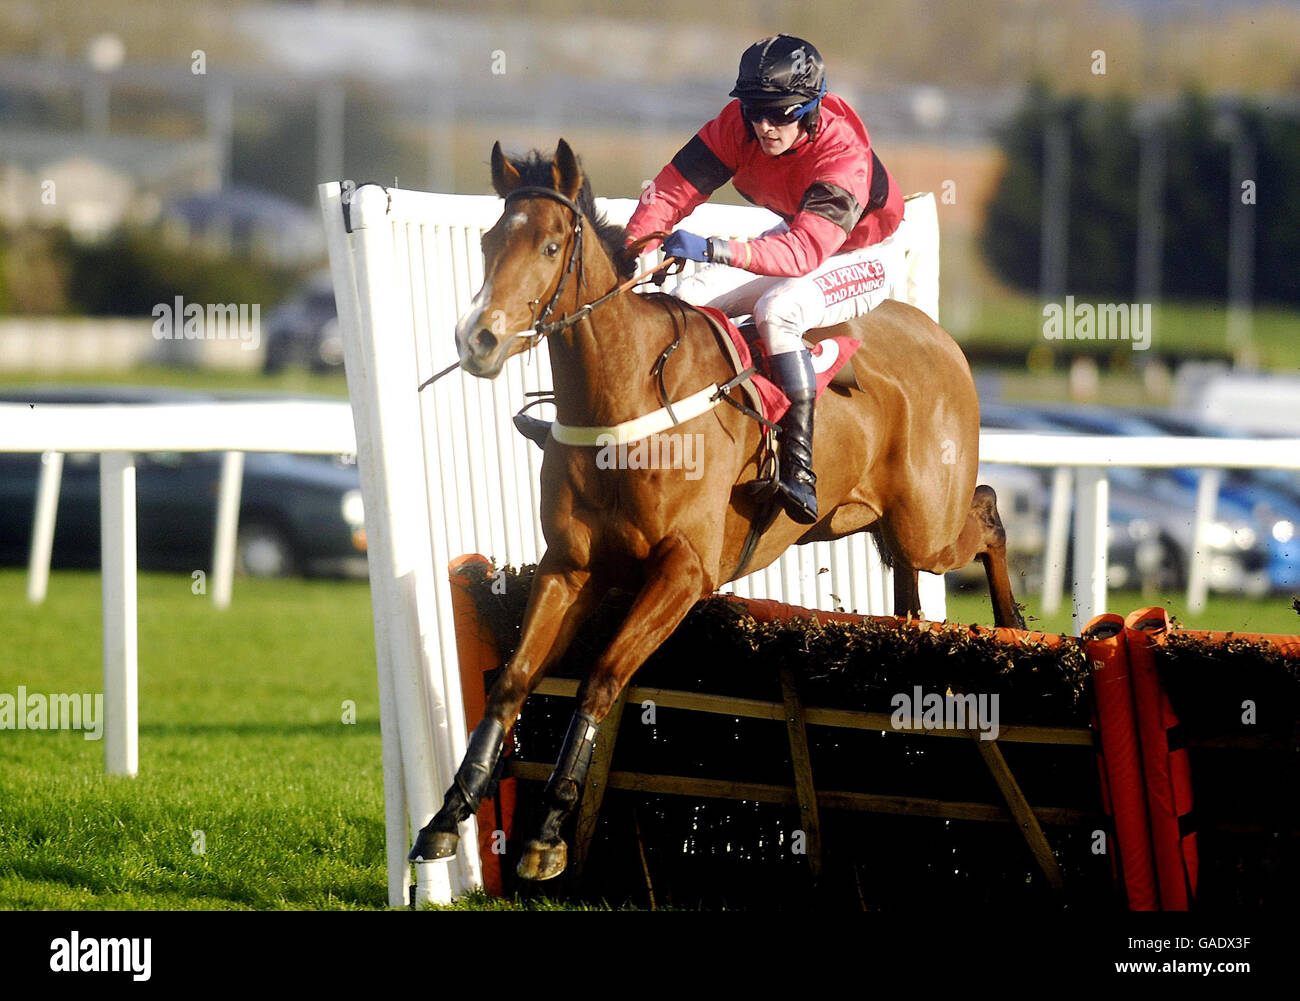 Horse Racing - Hennessy Cognac Gold Cup Day - Newbury Racecourse. Paddy Merrigan riding Helens Vision wins The Greyhounds Make Great Pets Novices Hurdle at Newbury Racecourse. Stock Photo